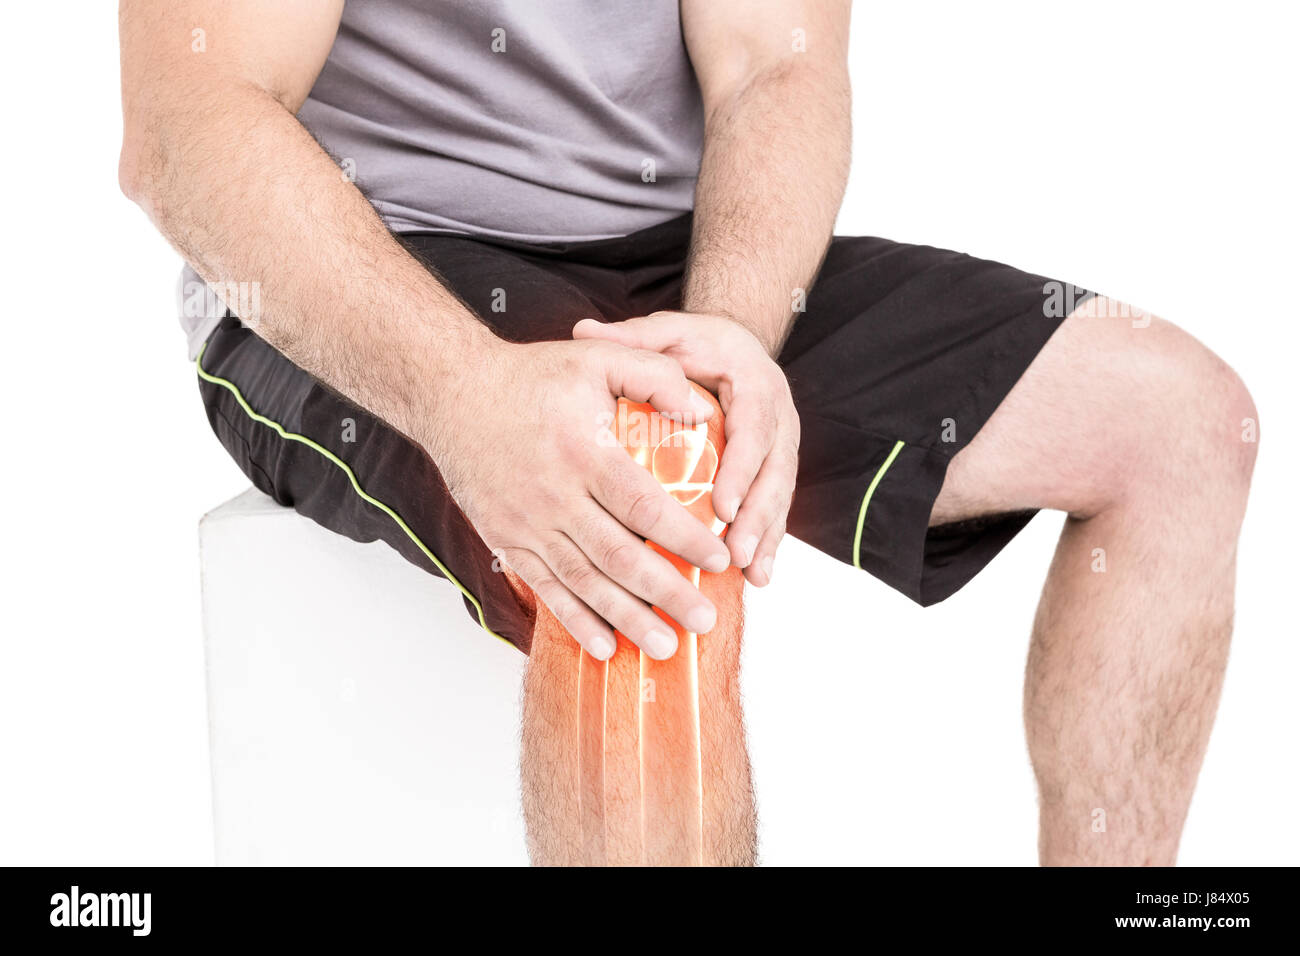 Digitally generated image of man suffering with knee inflammation against white background Stock Photo